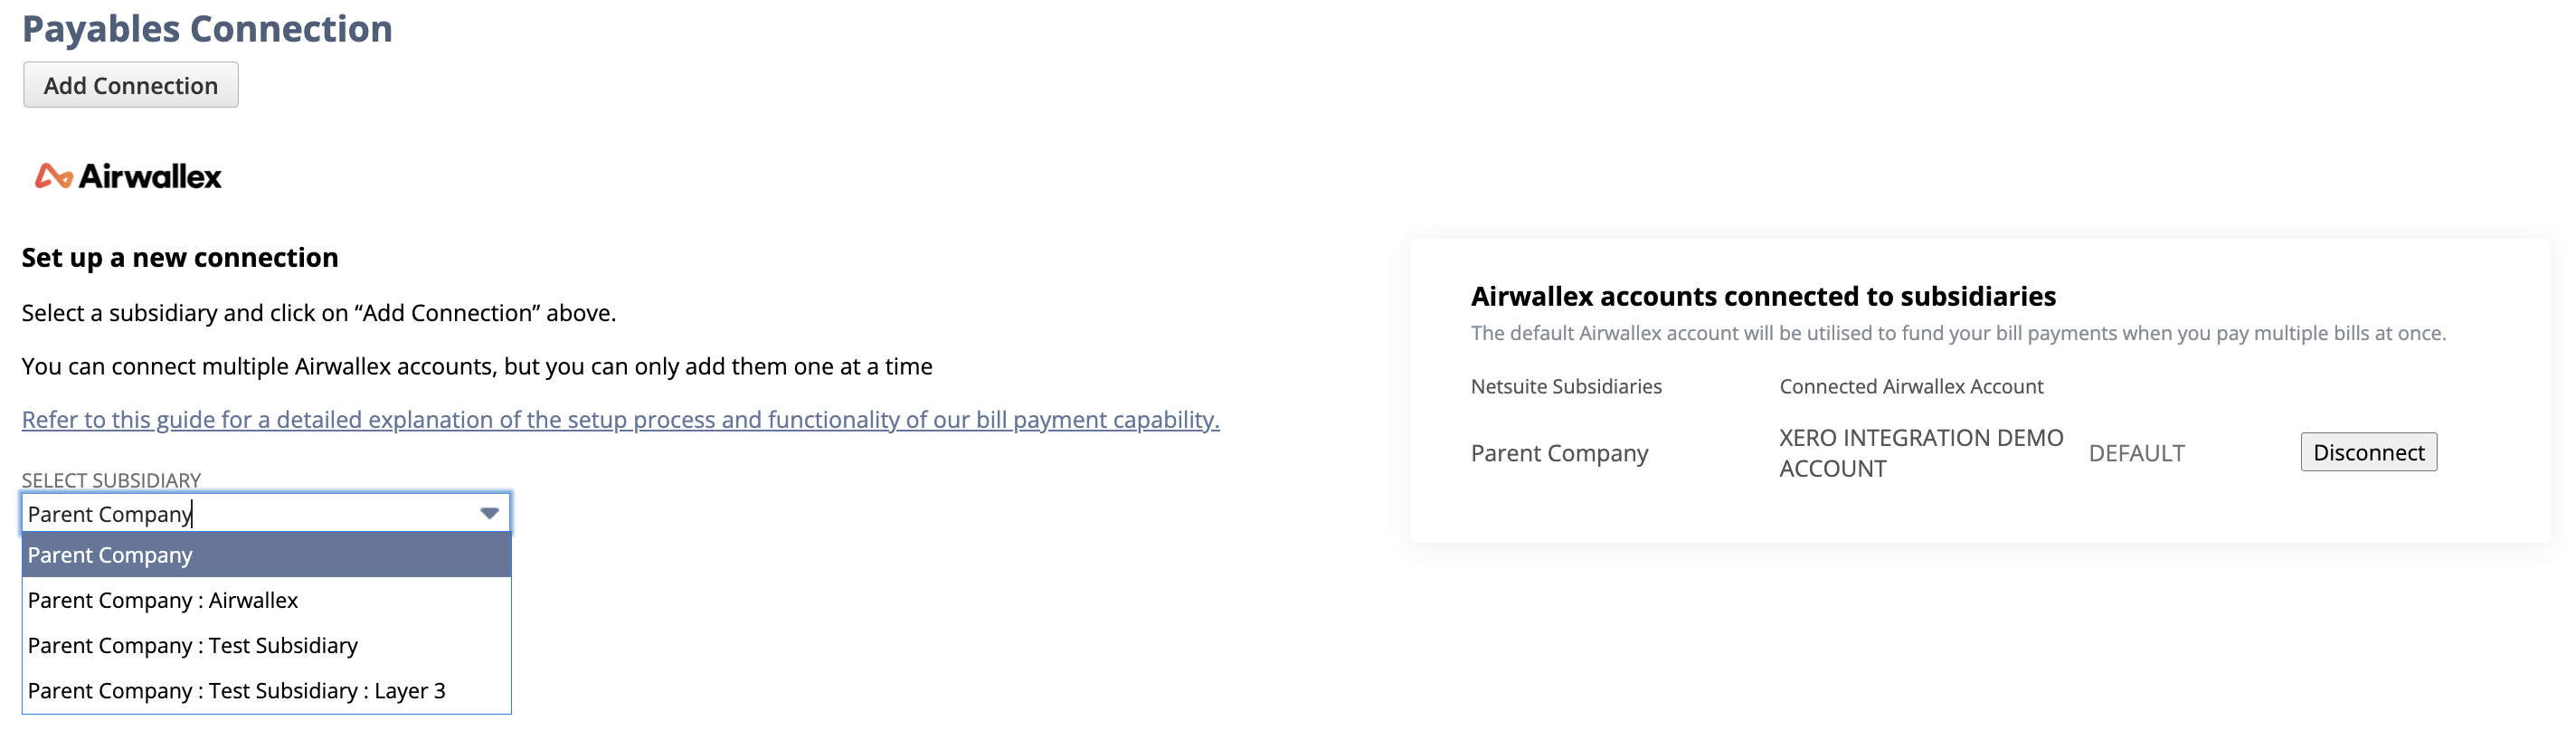 NetSuite_Payables_add connection.png